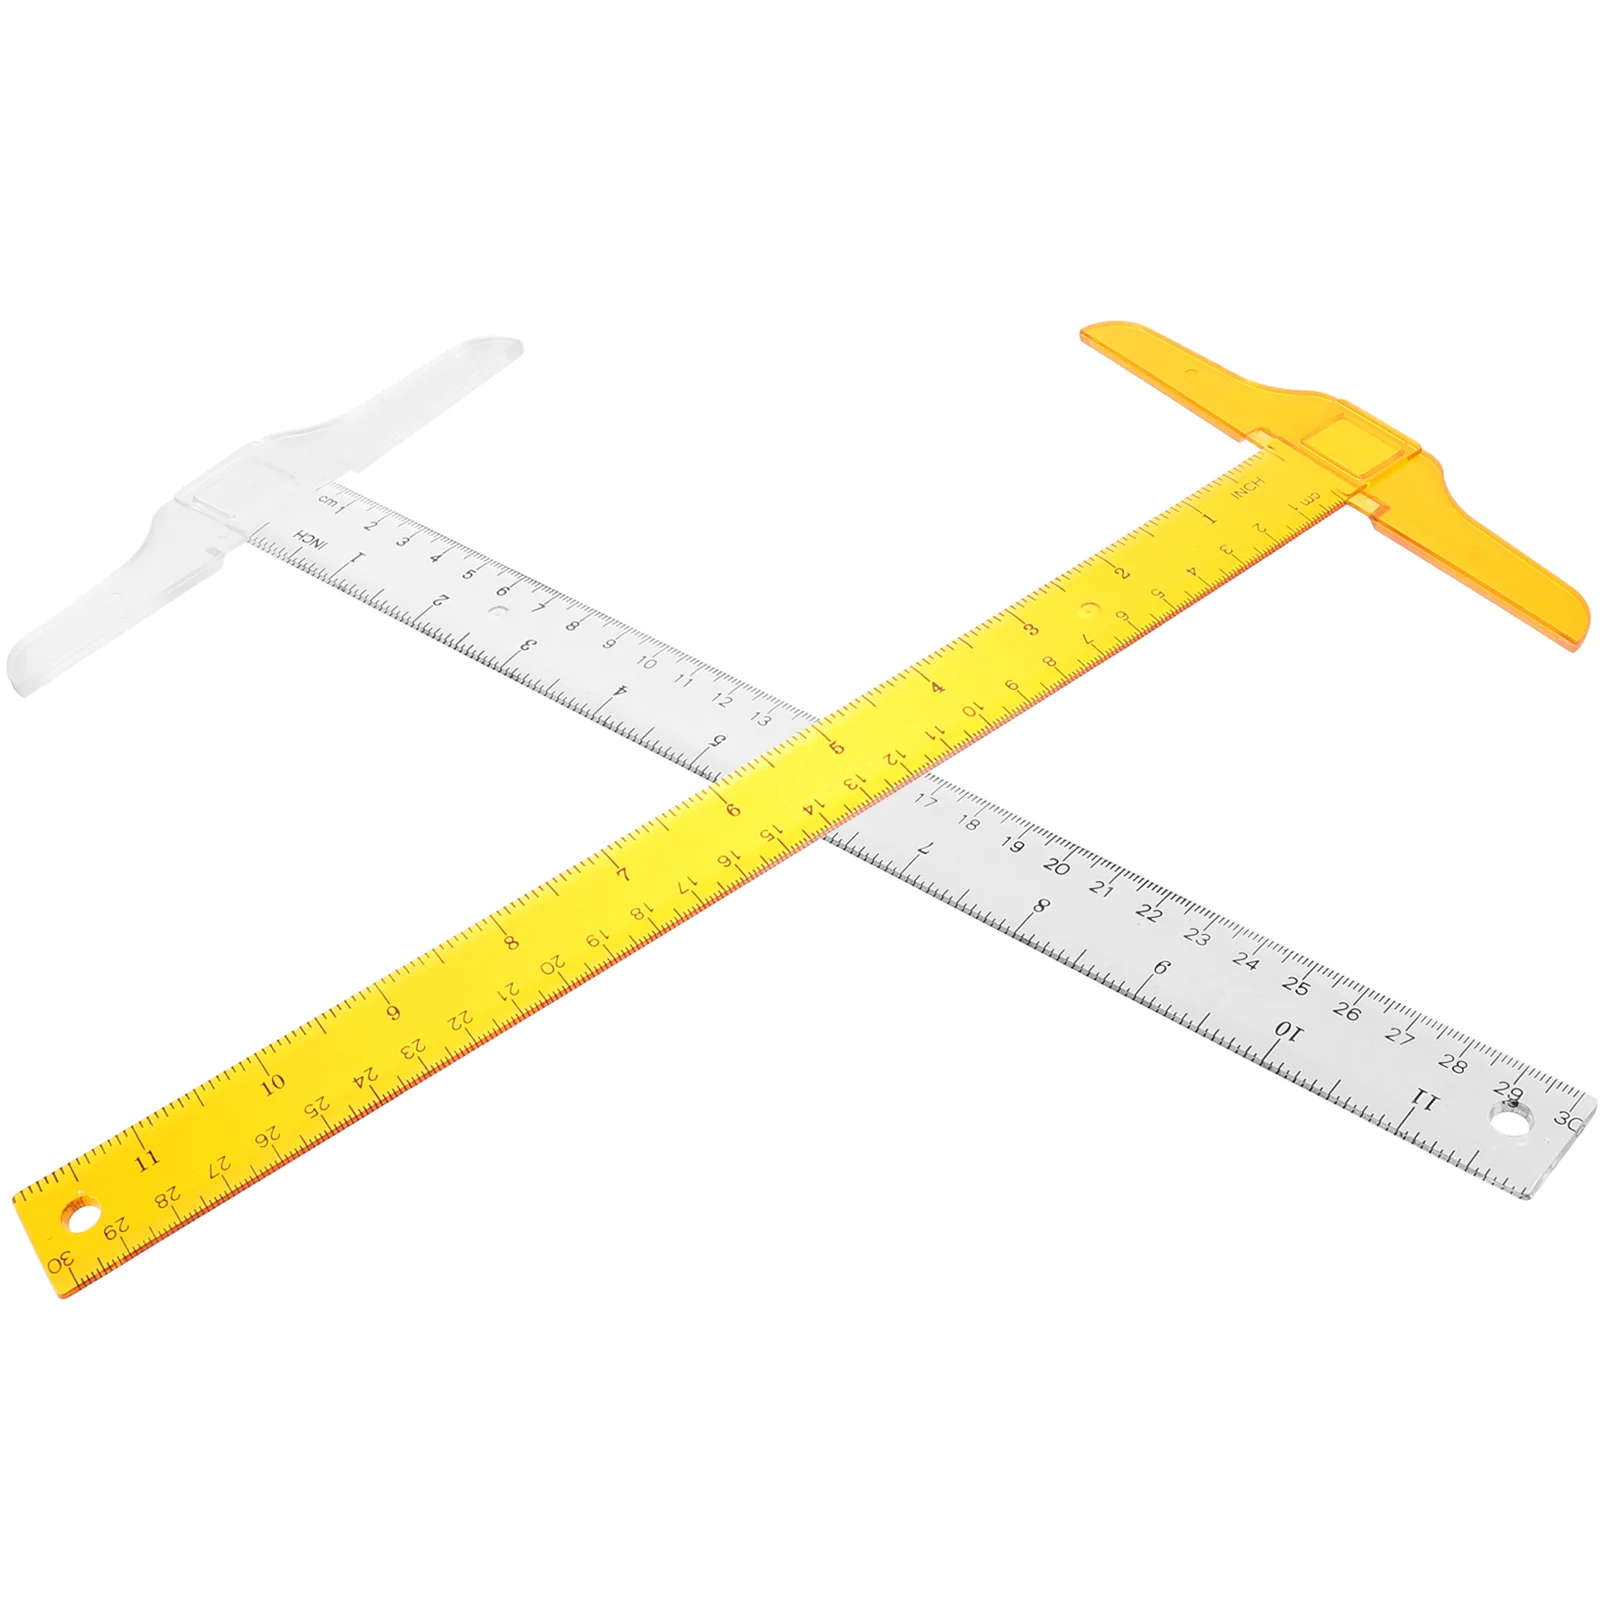 

2Pcs T Shape Rulers T- Square Ruler Straight Measuring Ruler for Architect Engineer Scale Tool Student Drafting ( Transparent